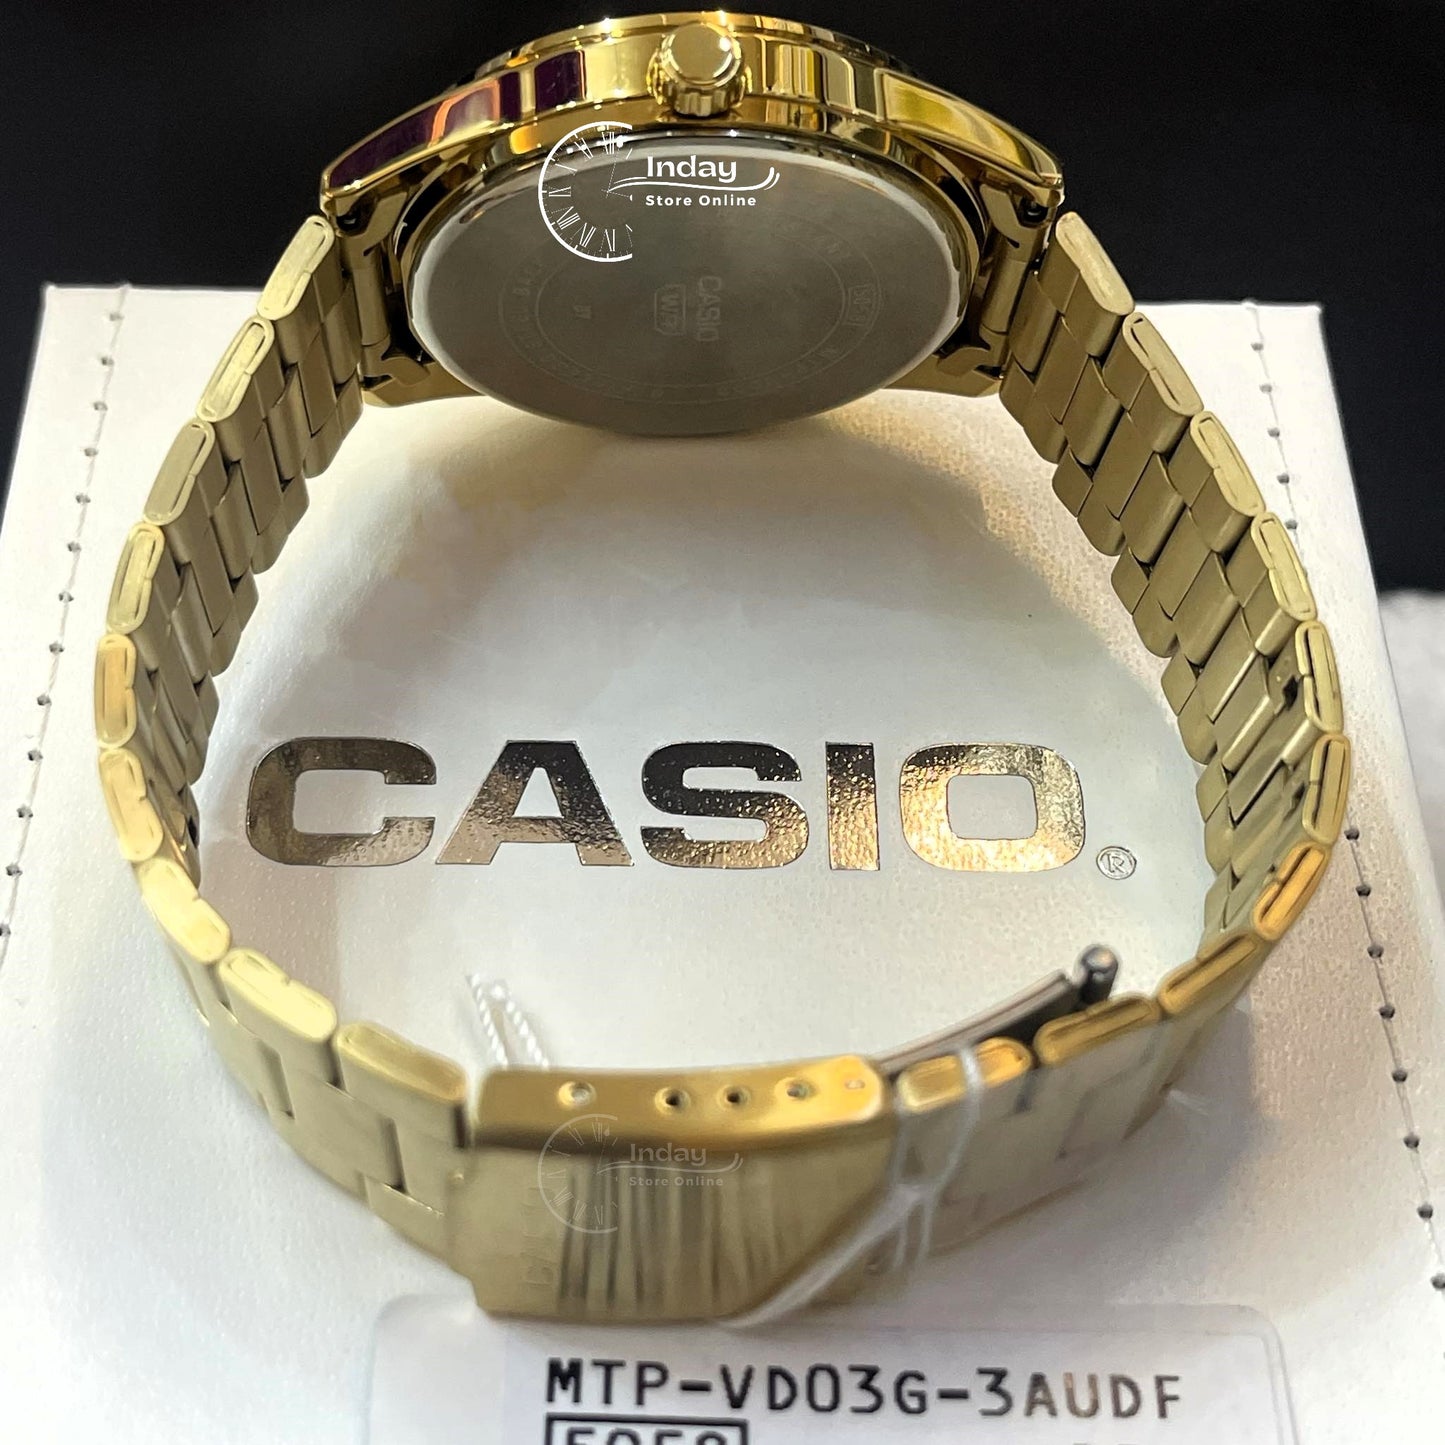 Casio Men's Watch MTP-VD03G-3A Stainless Steel Band Triple-fold Clasp Mineral Glass